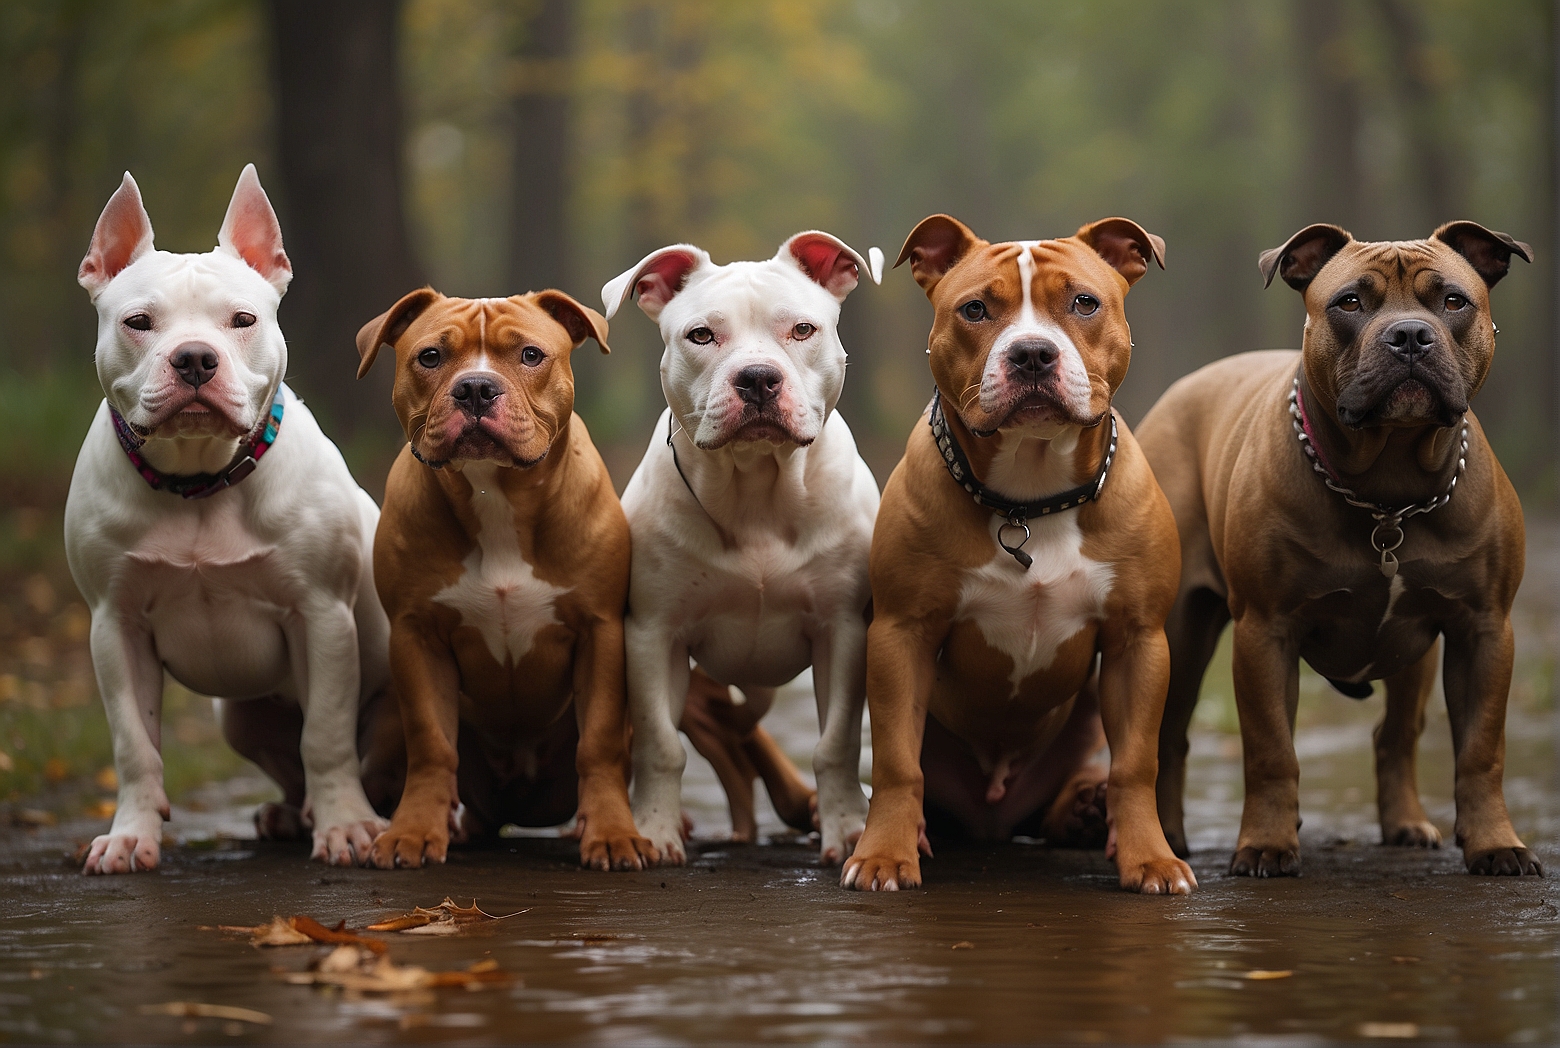 How Many American Staffordshire Terrier Breeds Are There